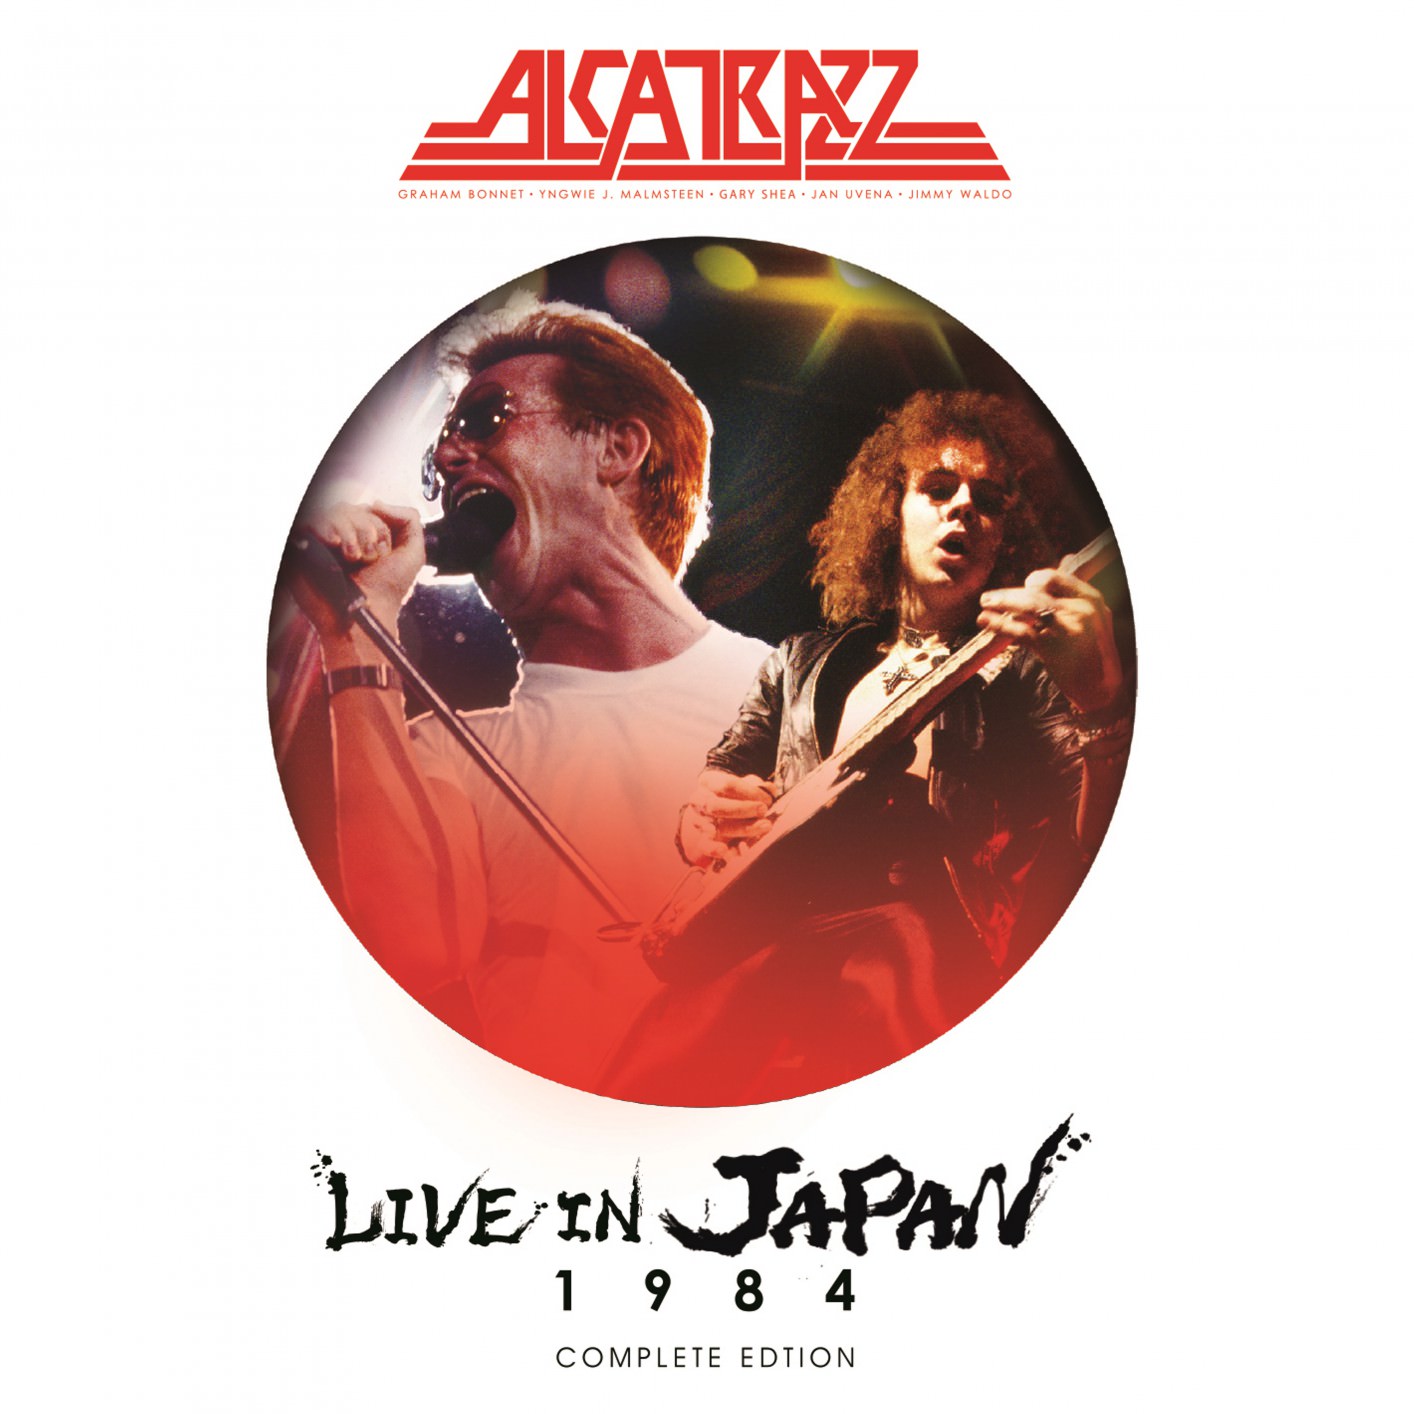 Alcatrazz - Live in Japan 1984 - Complete Edition (2018) [FLAC 24bit/96kHz]